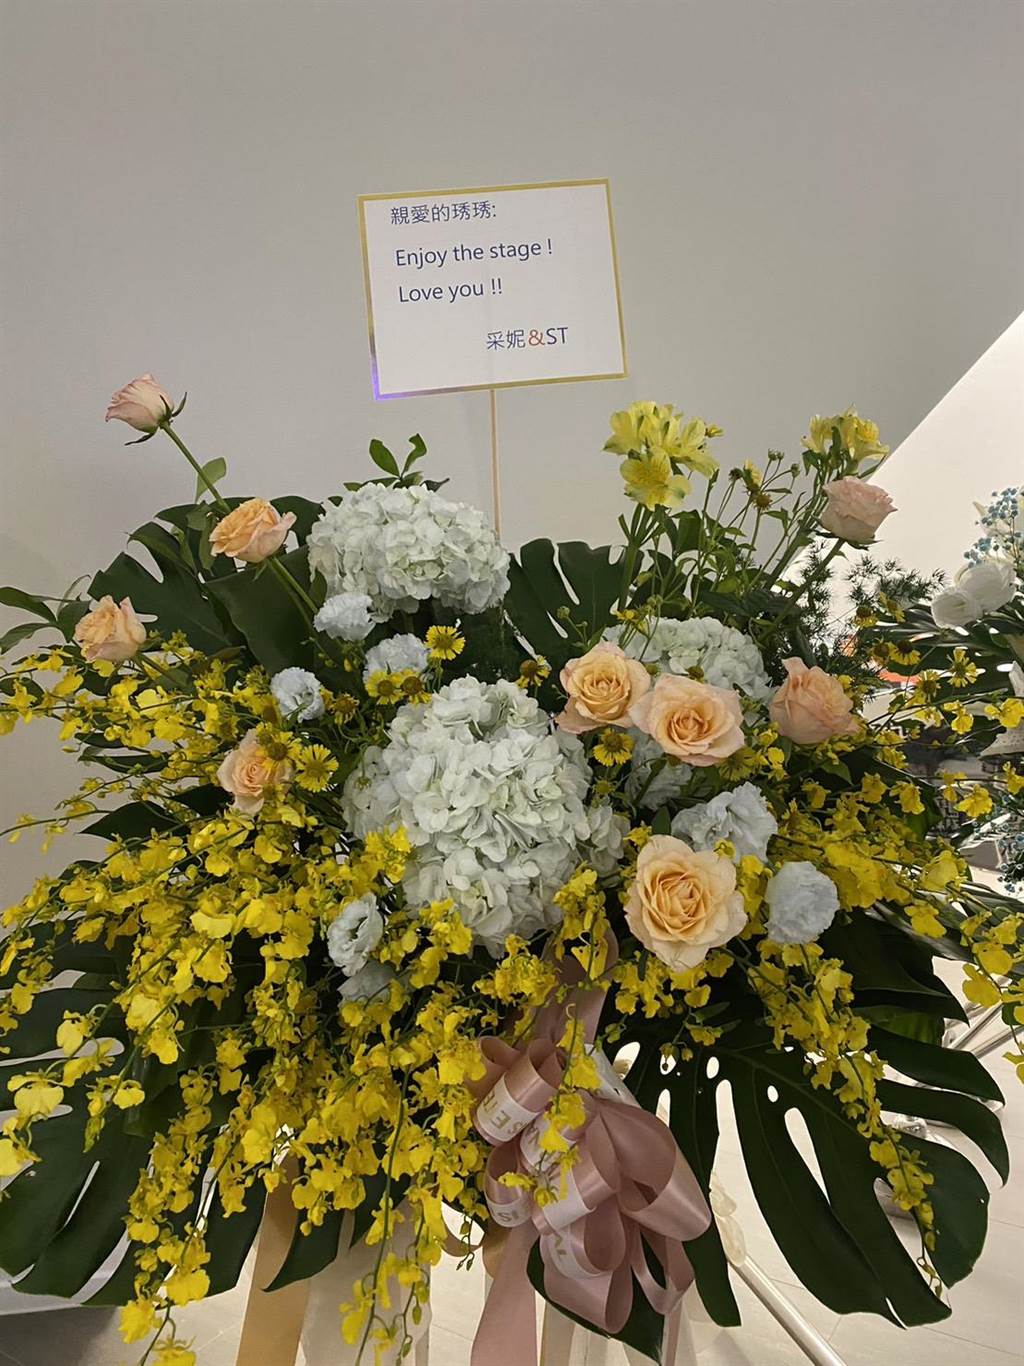 Yang Caini specially sent a flower basket to congratulate her tonight.  (Photo by Xu Yachun)